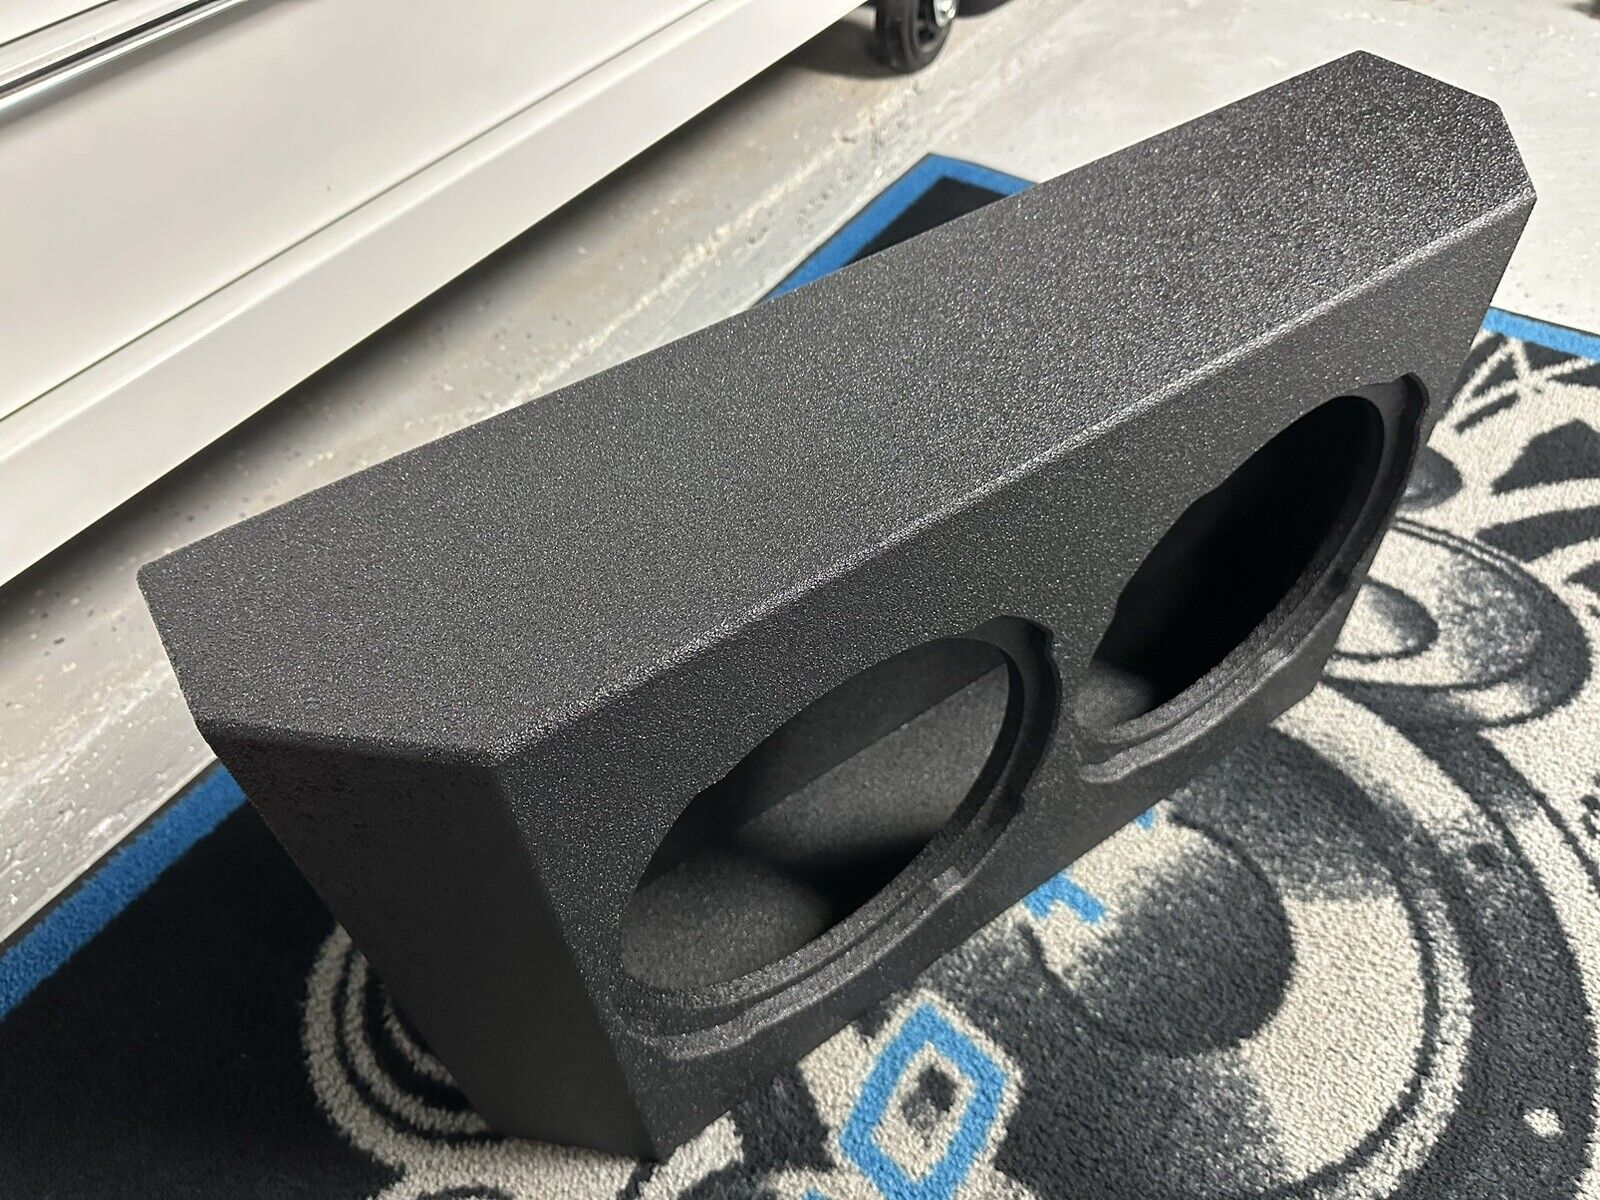 Ford Bronco Upgrading Subwoofers to 2 x JL Audio 10TW3-D4 s-l1600 3